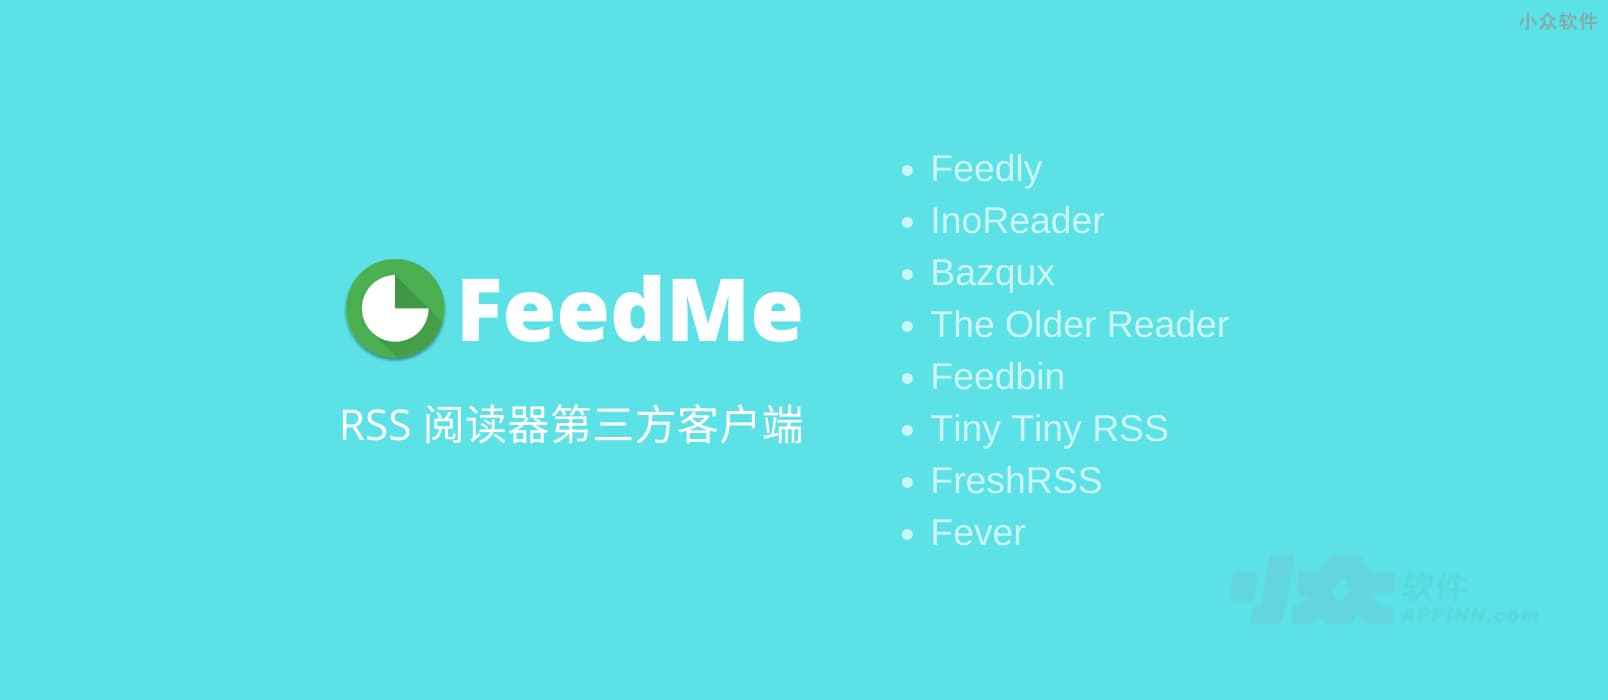 Feedme - 8大 RSS 阅读器第三方客户端[Android] 1